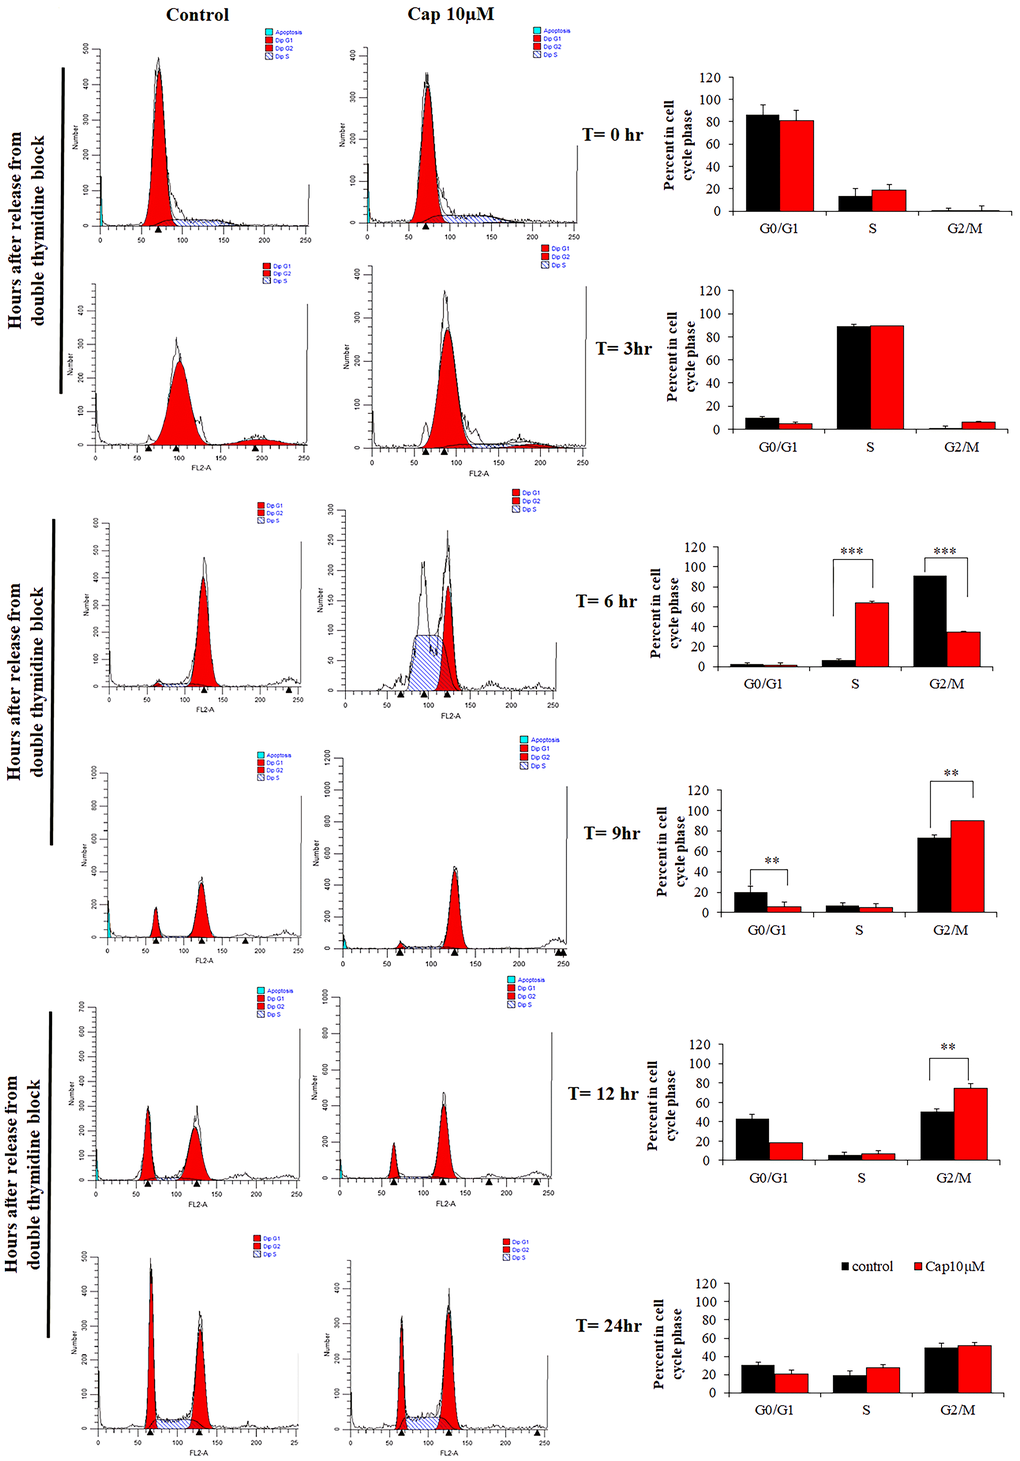 Capsanthin delays cell-cycle progression in MDA-MB-231 cells. MDA-MB-231 cells synchronized at G1/S were treated with 10 μM capsanthin for 0, 3, 6, 9, 12 or 24 h, after which their cell-cycle stage was assessed by flow cytometry. *P **P ***P 